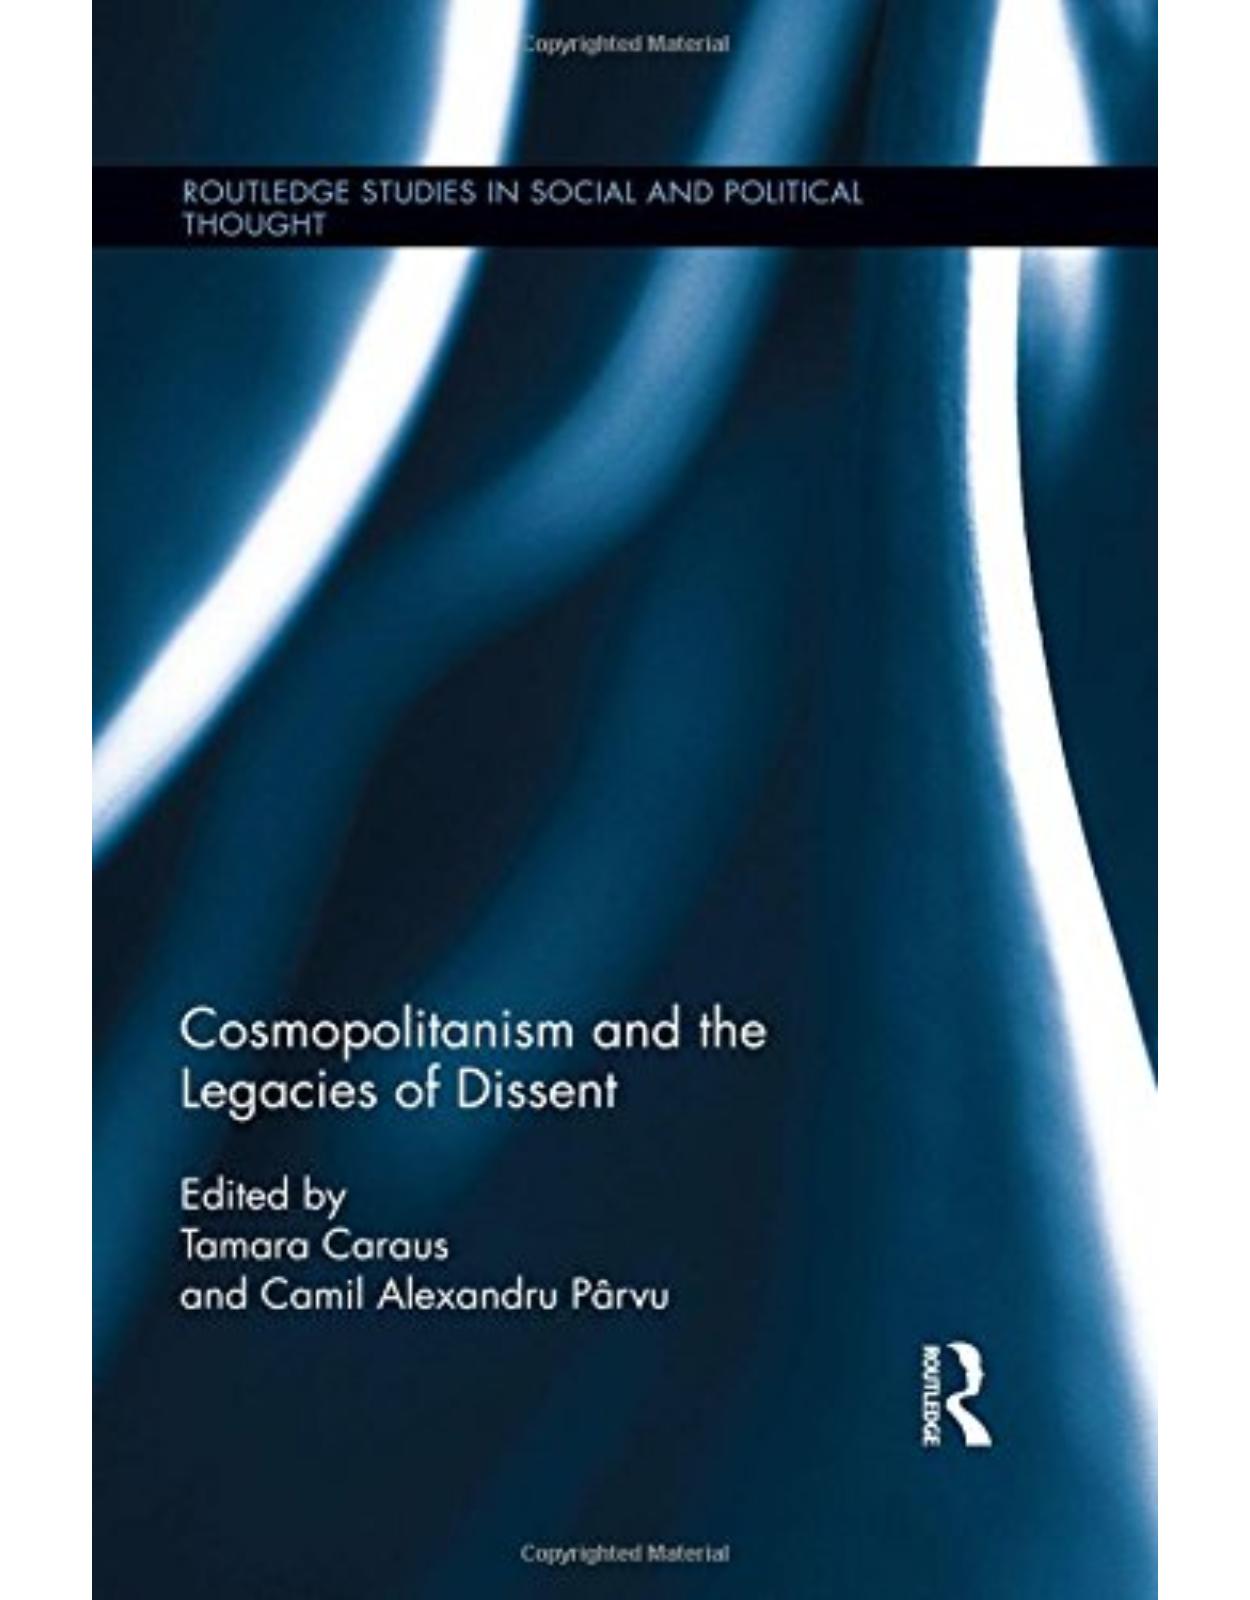 Cosmopolitanism and the Legacies of Dissent (Routledge Studies in Social and Political Thought)